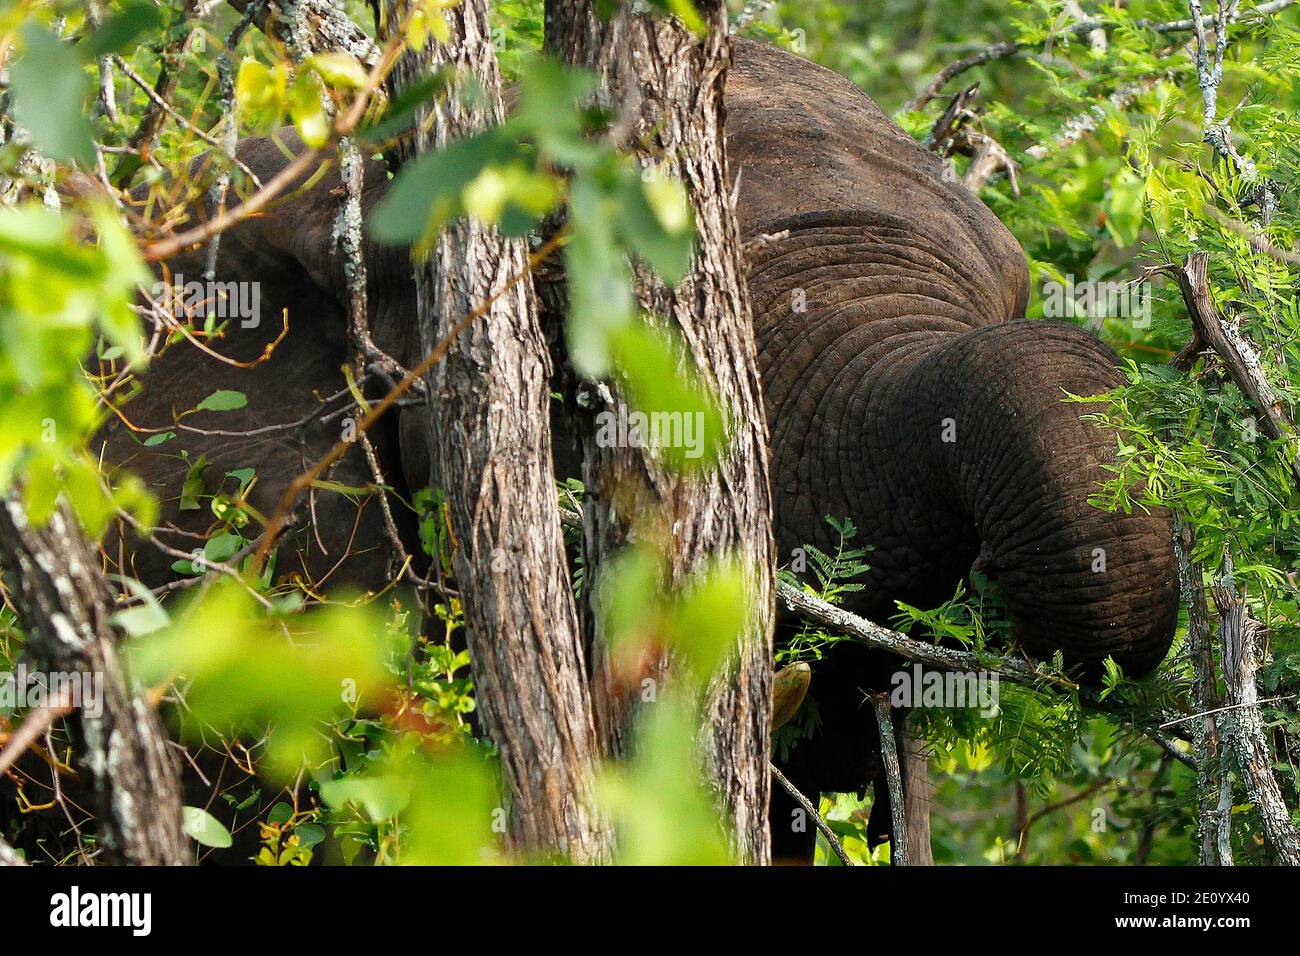 Wild African elephants in the natural African bush. Stock Photo